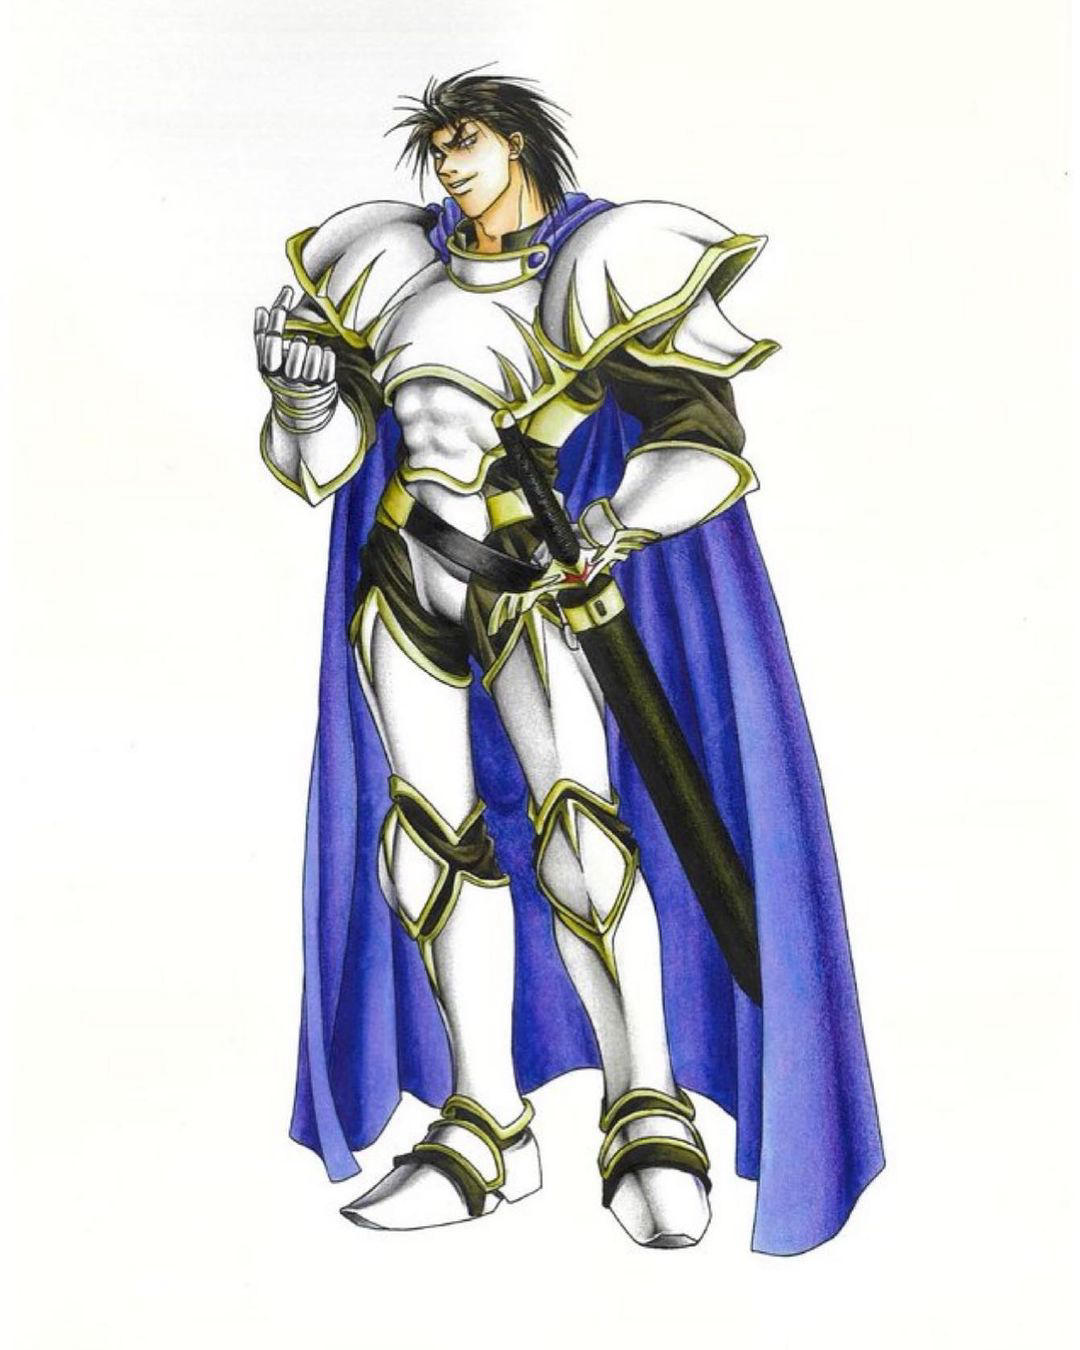 Konami Digital Entertainment - How awesome is this original character drawing of Luca Blight from #S